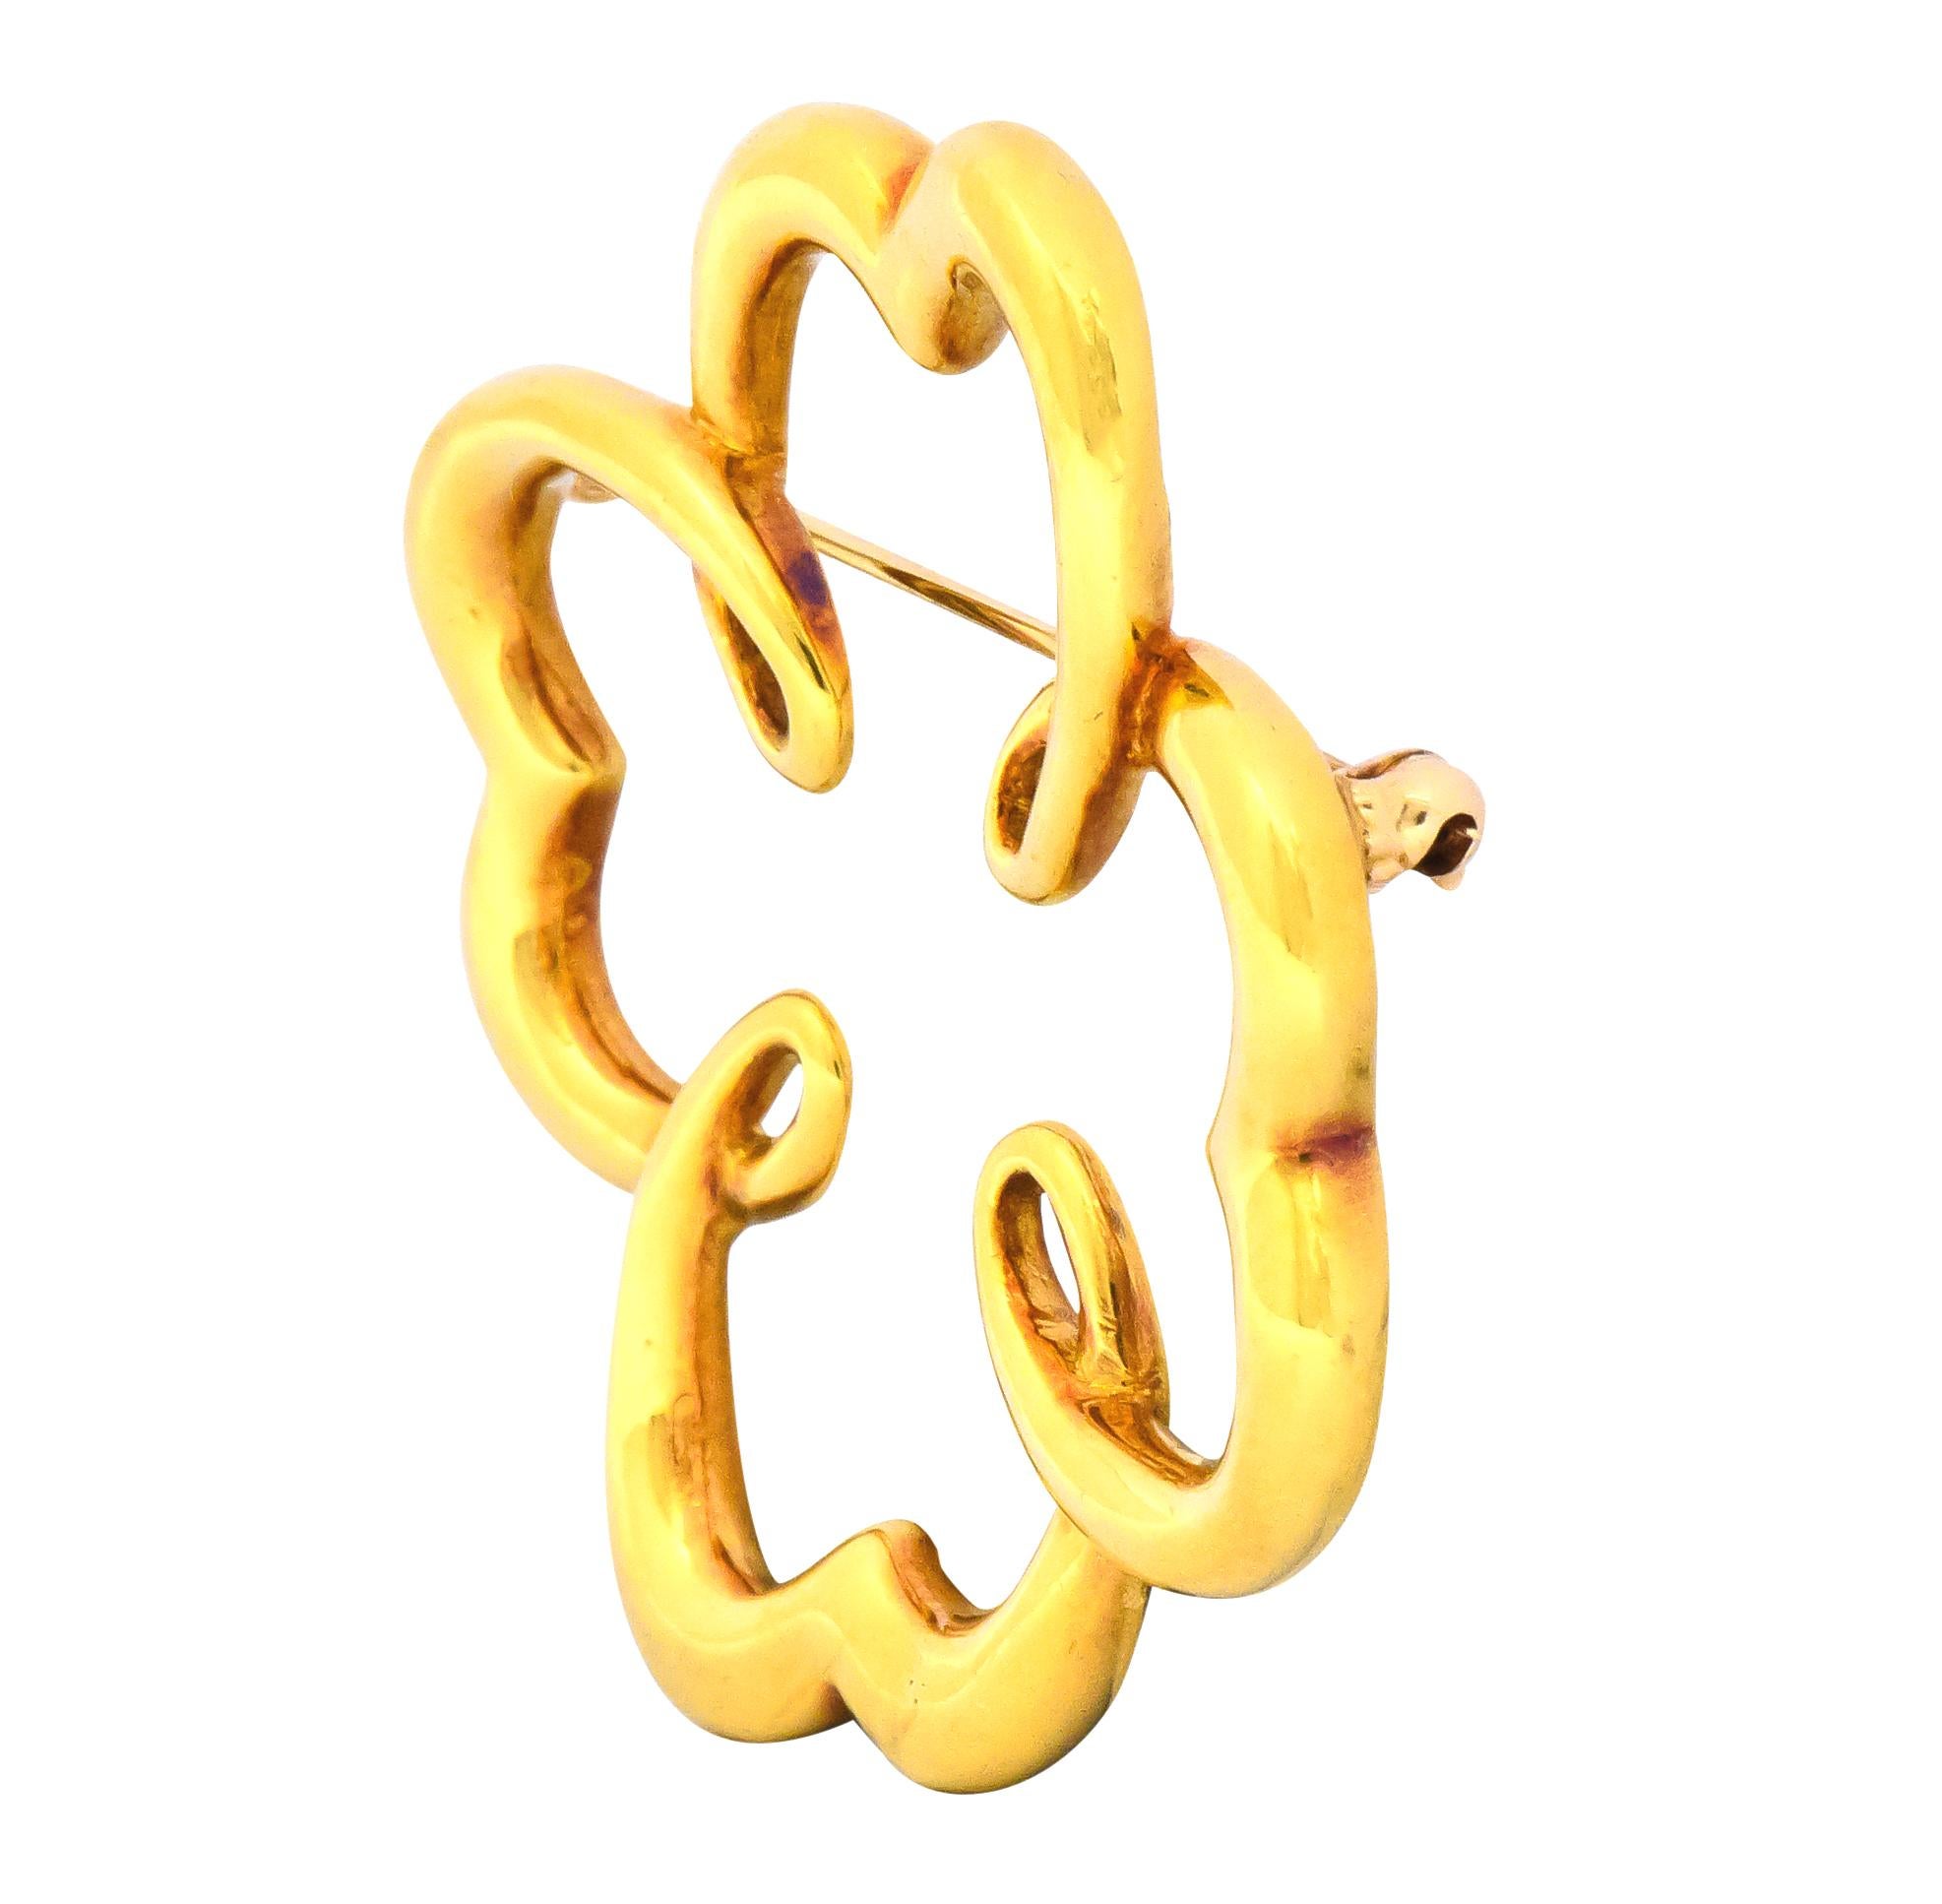 Designed as a stylized quatrefoil motif with sweetly swirled details

With a bright finish

Fully signed Paloma Picasso 1981 and T & Co. for Tiffany & Co.  

Stamped 18K for 18 karat gold

Circa: 1981

Measuring: 1 3/4 x 1 3/4 inches

Total weight: